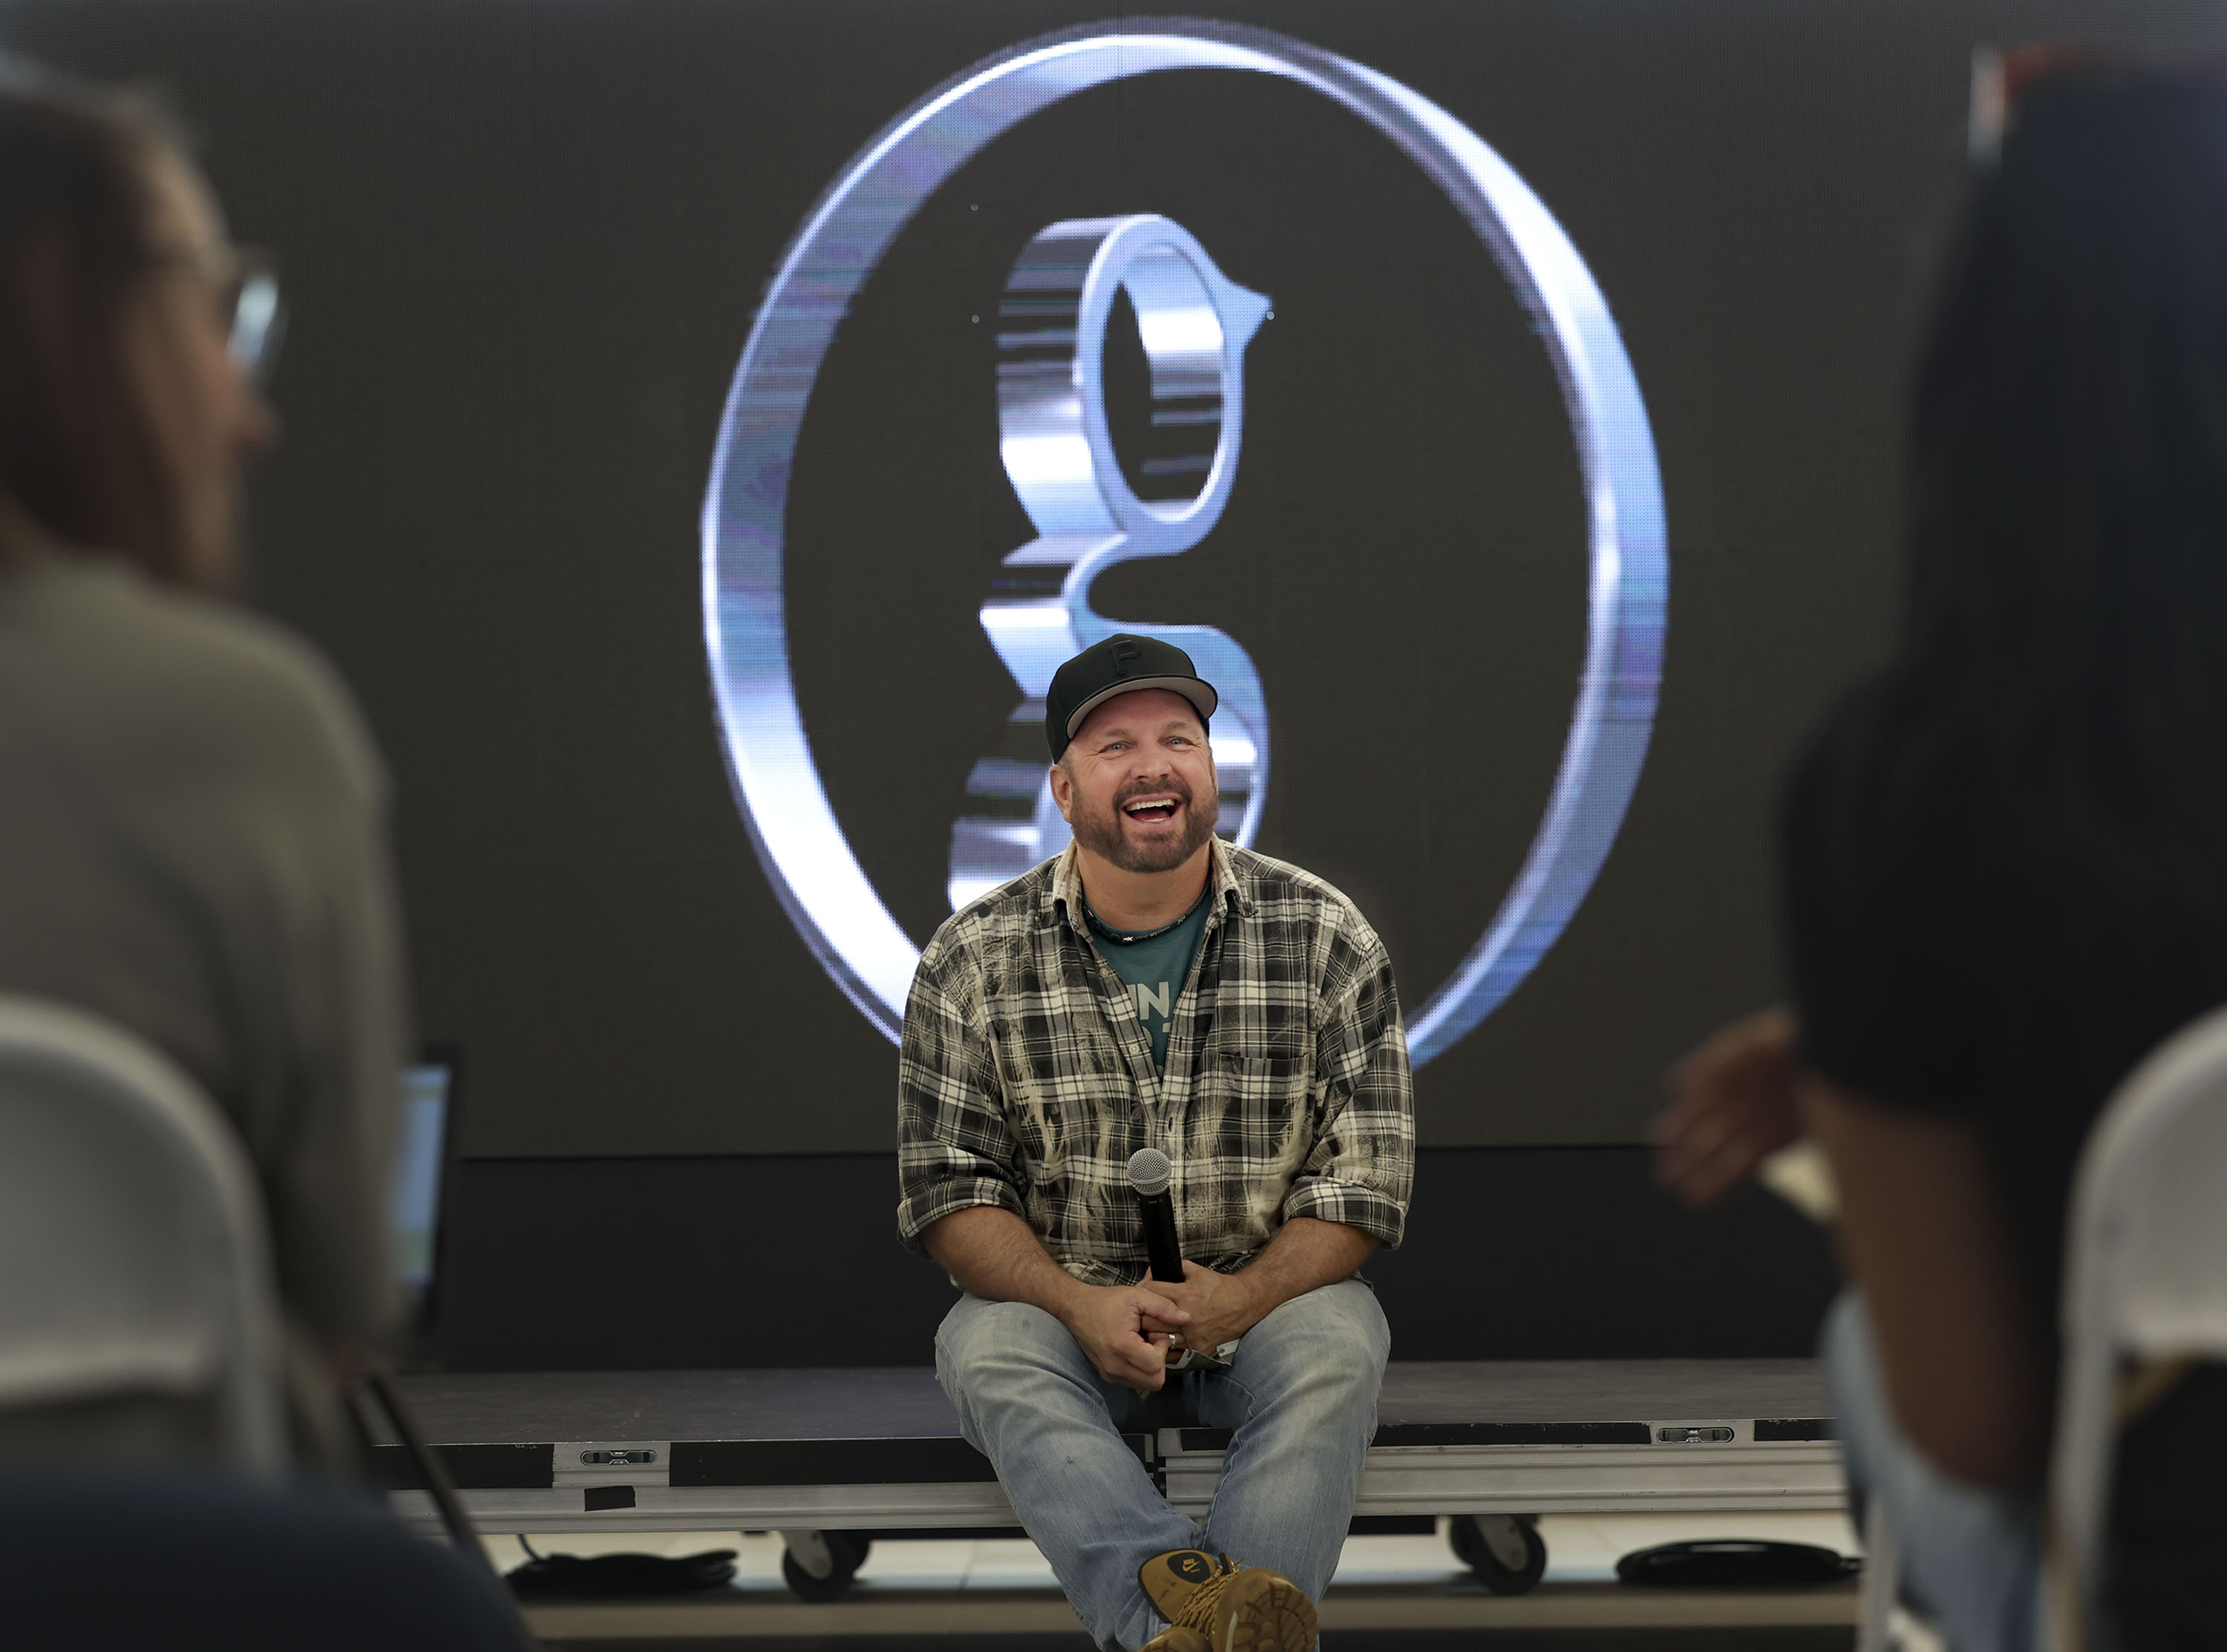 garthbrooks has announced his new album “Time Traveler” will be